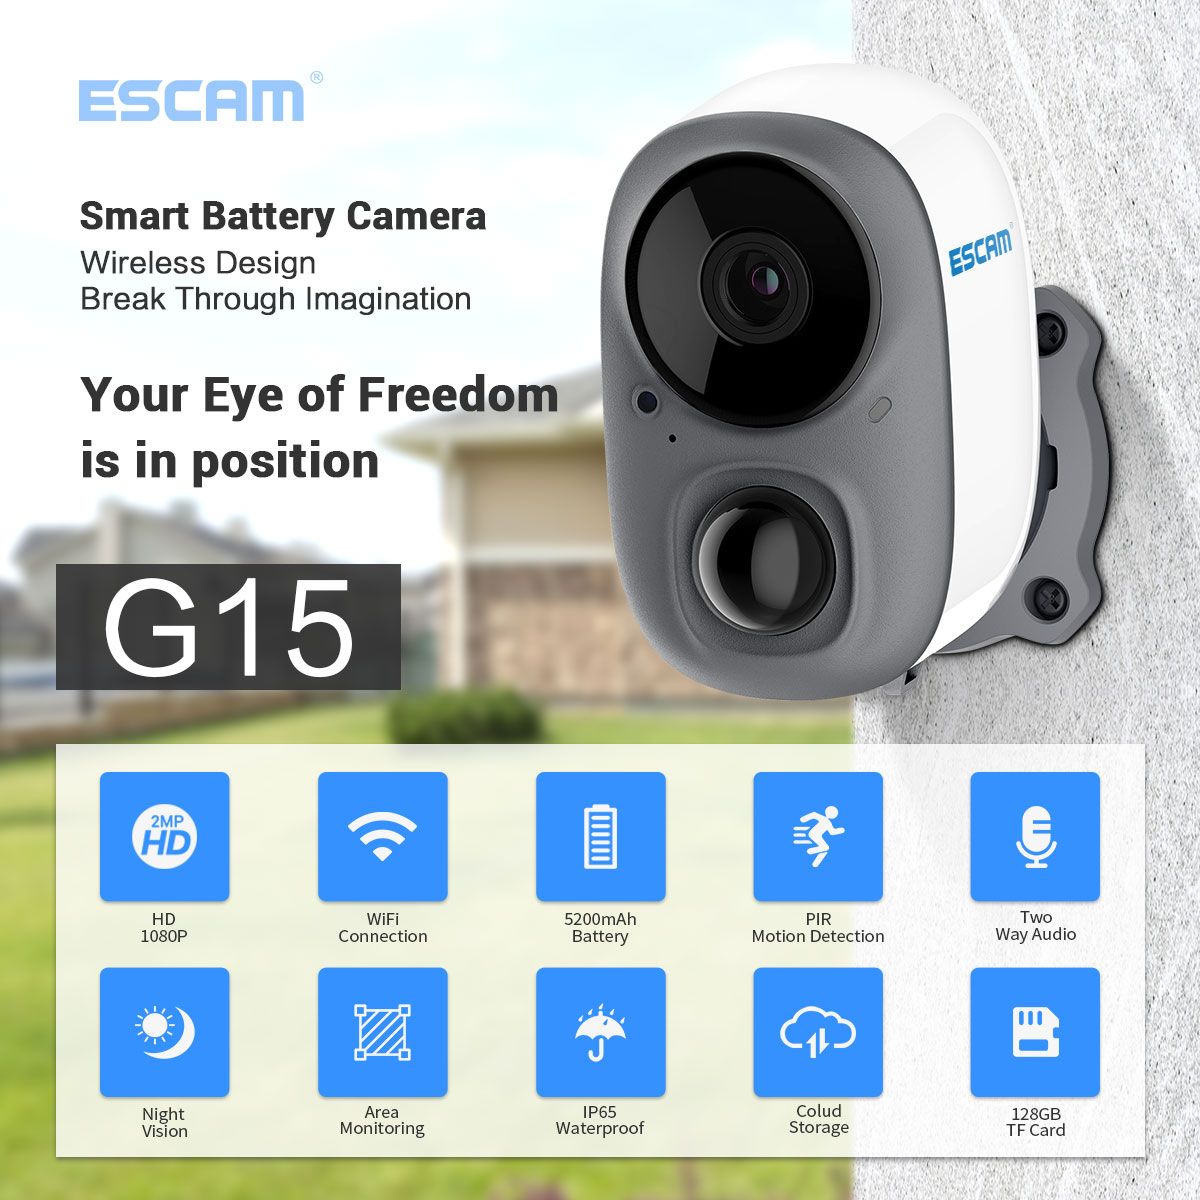 ESCAM-G15-1080P-Full-HD-AI-Recognition-Rechargeable-Battery-PIR-Alarm-Cloud-Storage-WiFi-Camera-1744206